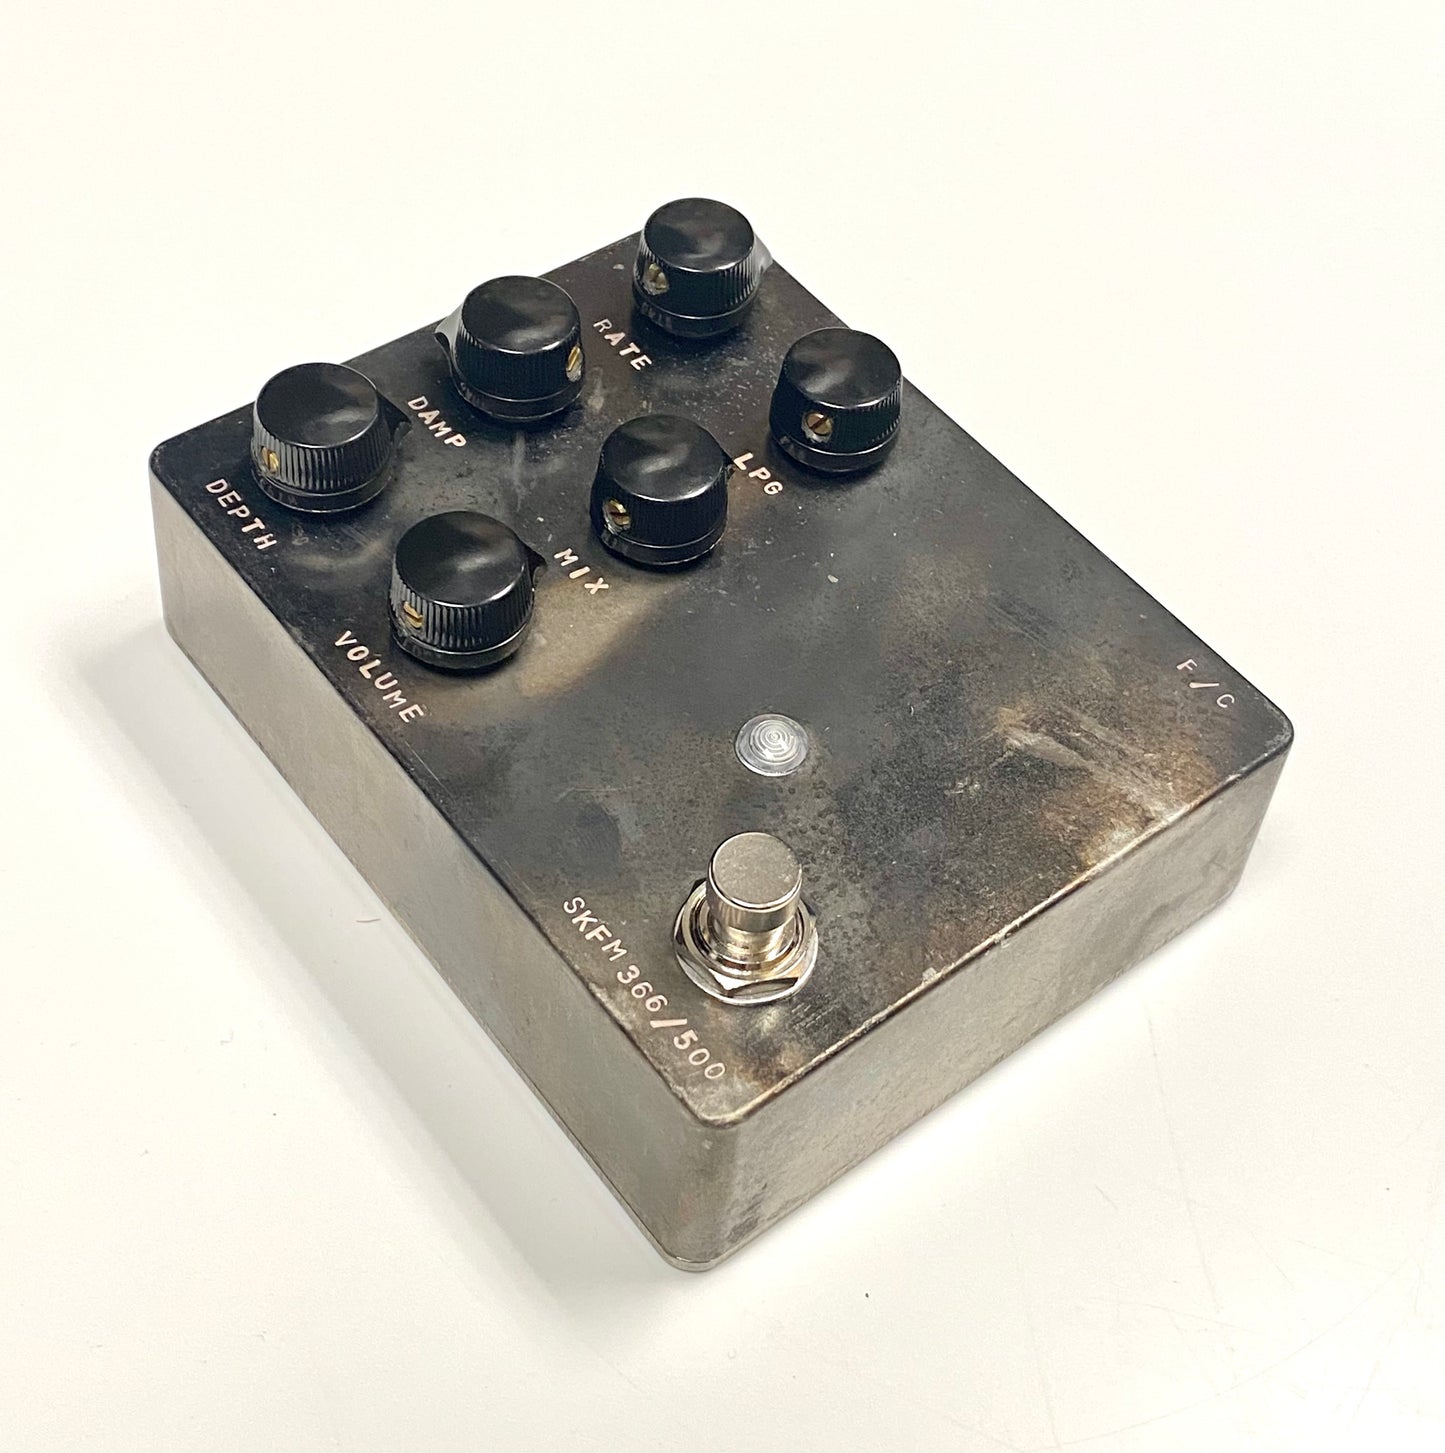 Fairfield Circuitry Shallow Water (Special Edition #366)